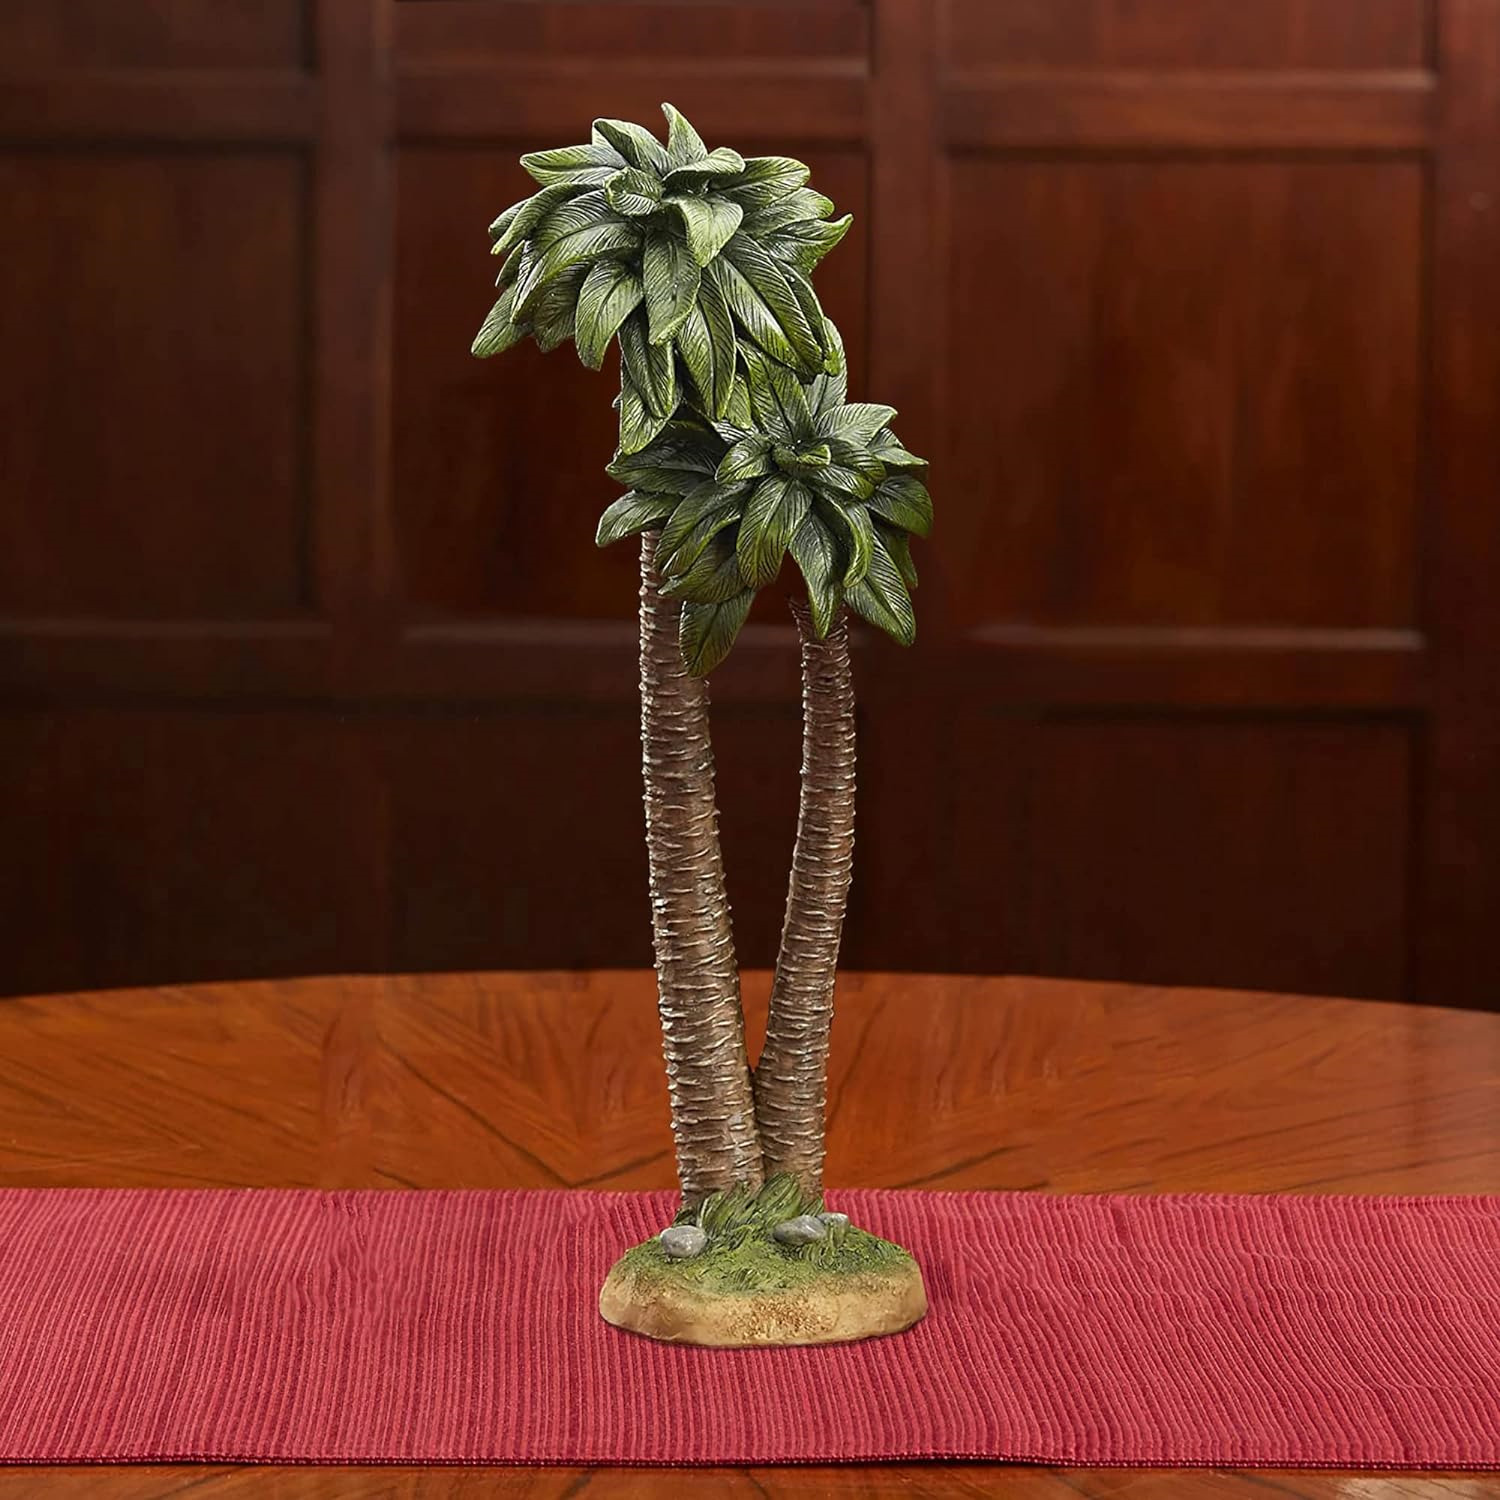 THREE KINGS GIFTS THE ORIGINAL GIFTS OF CHRISTMAS Realistic Palm Tree Polystone